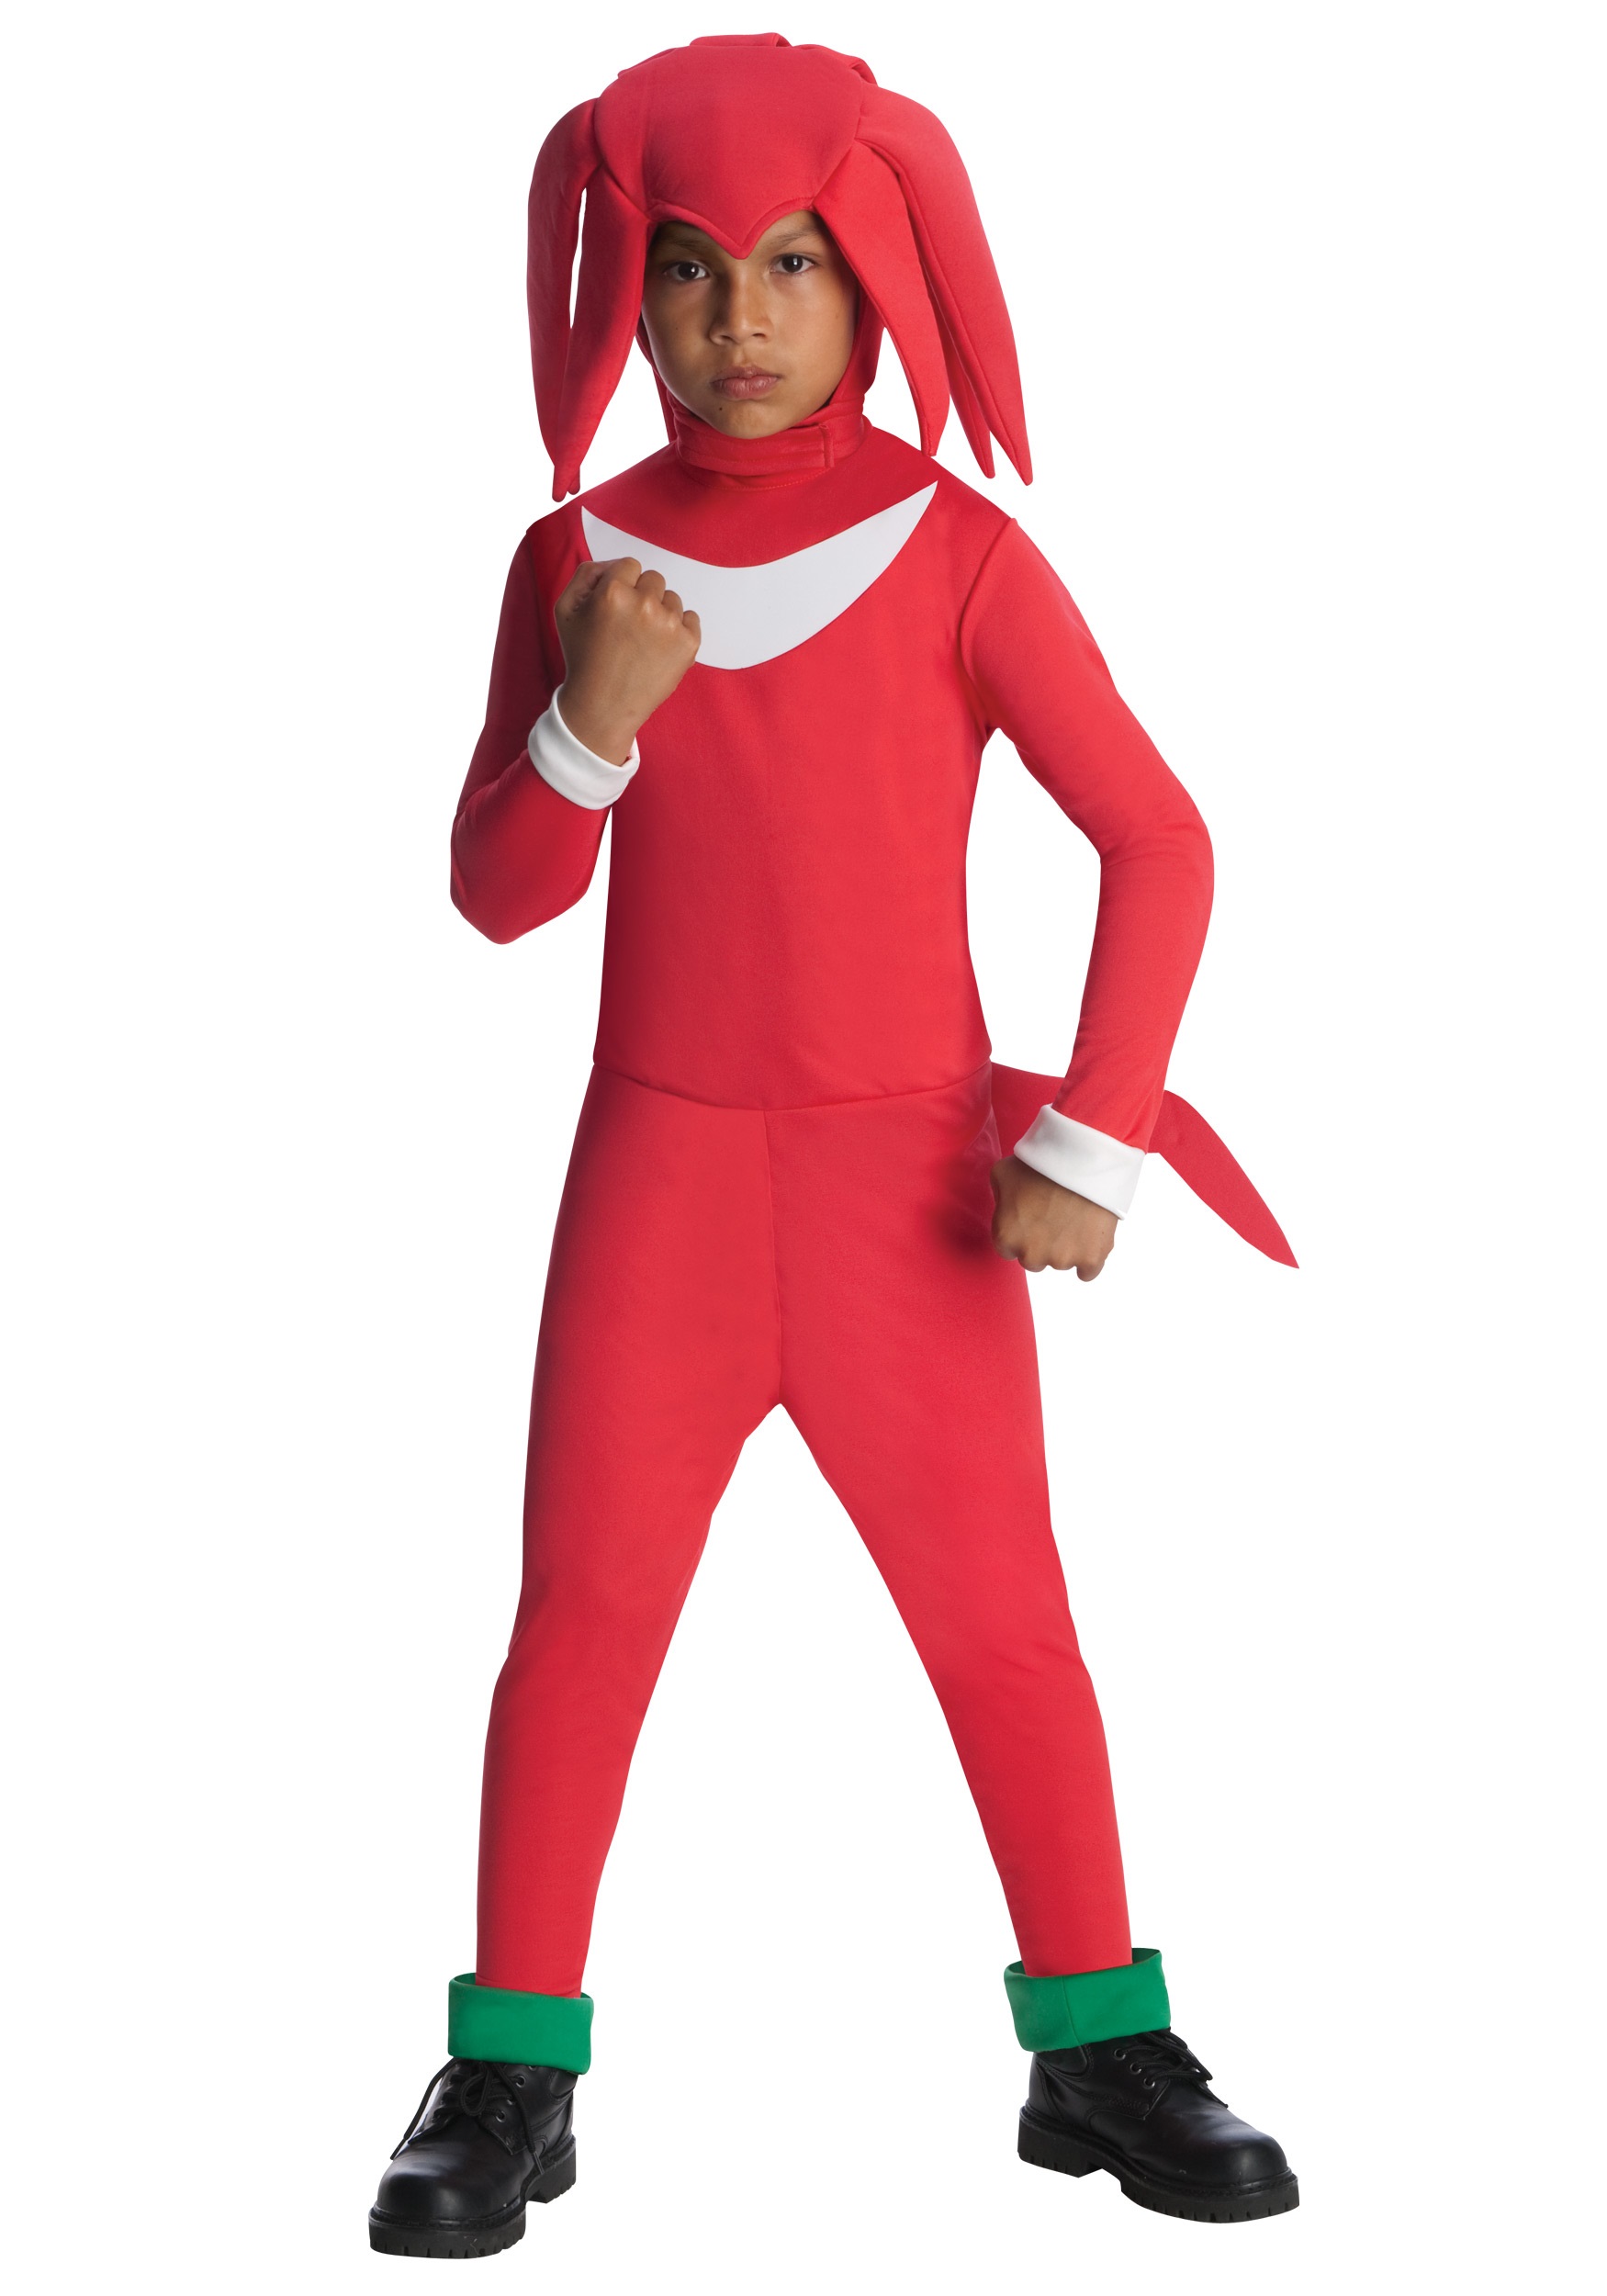 Child Knuckles Costume with Free Shipping in U.S., UK, Europe, Canada | Ord...